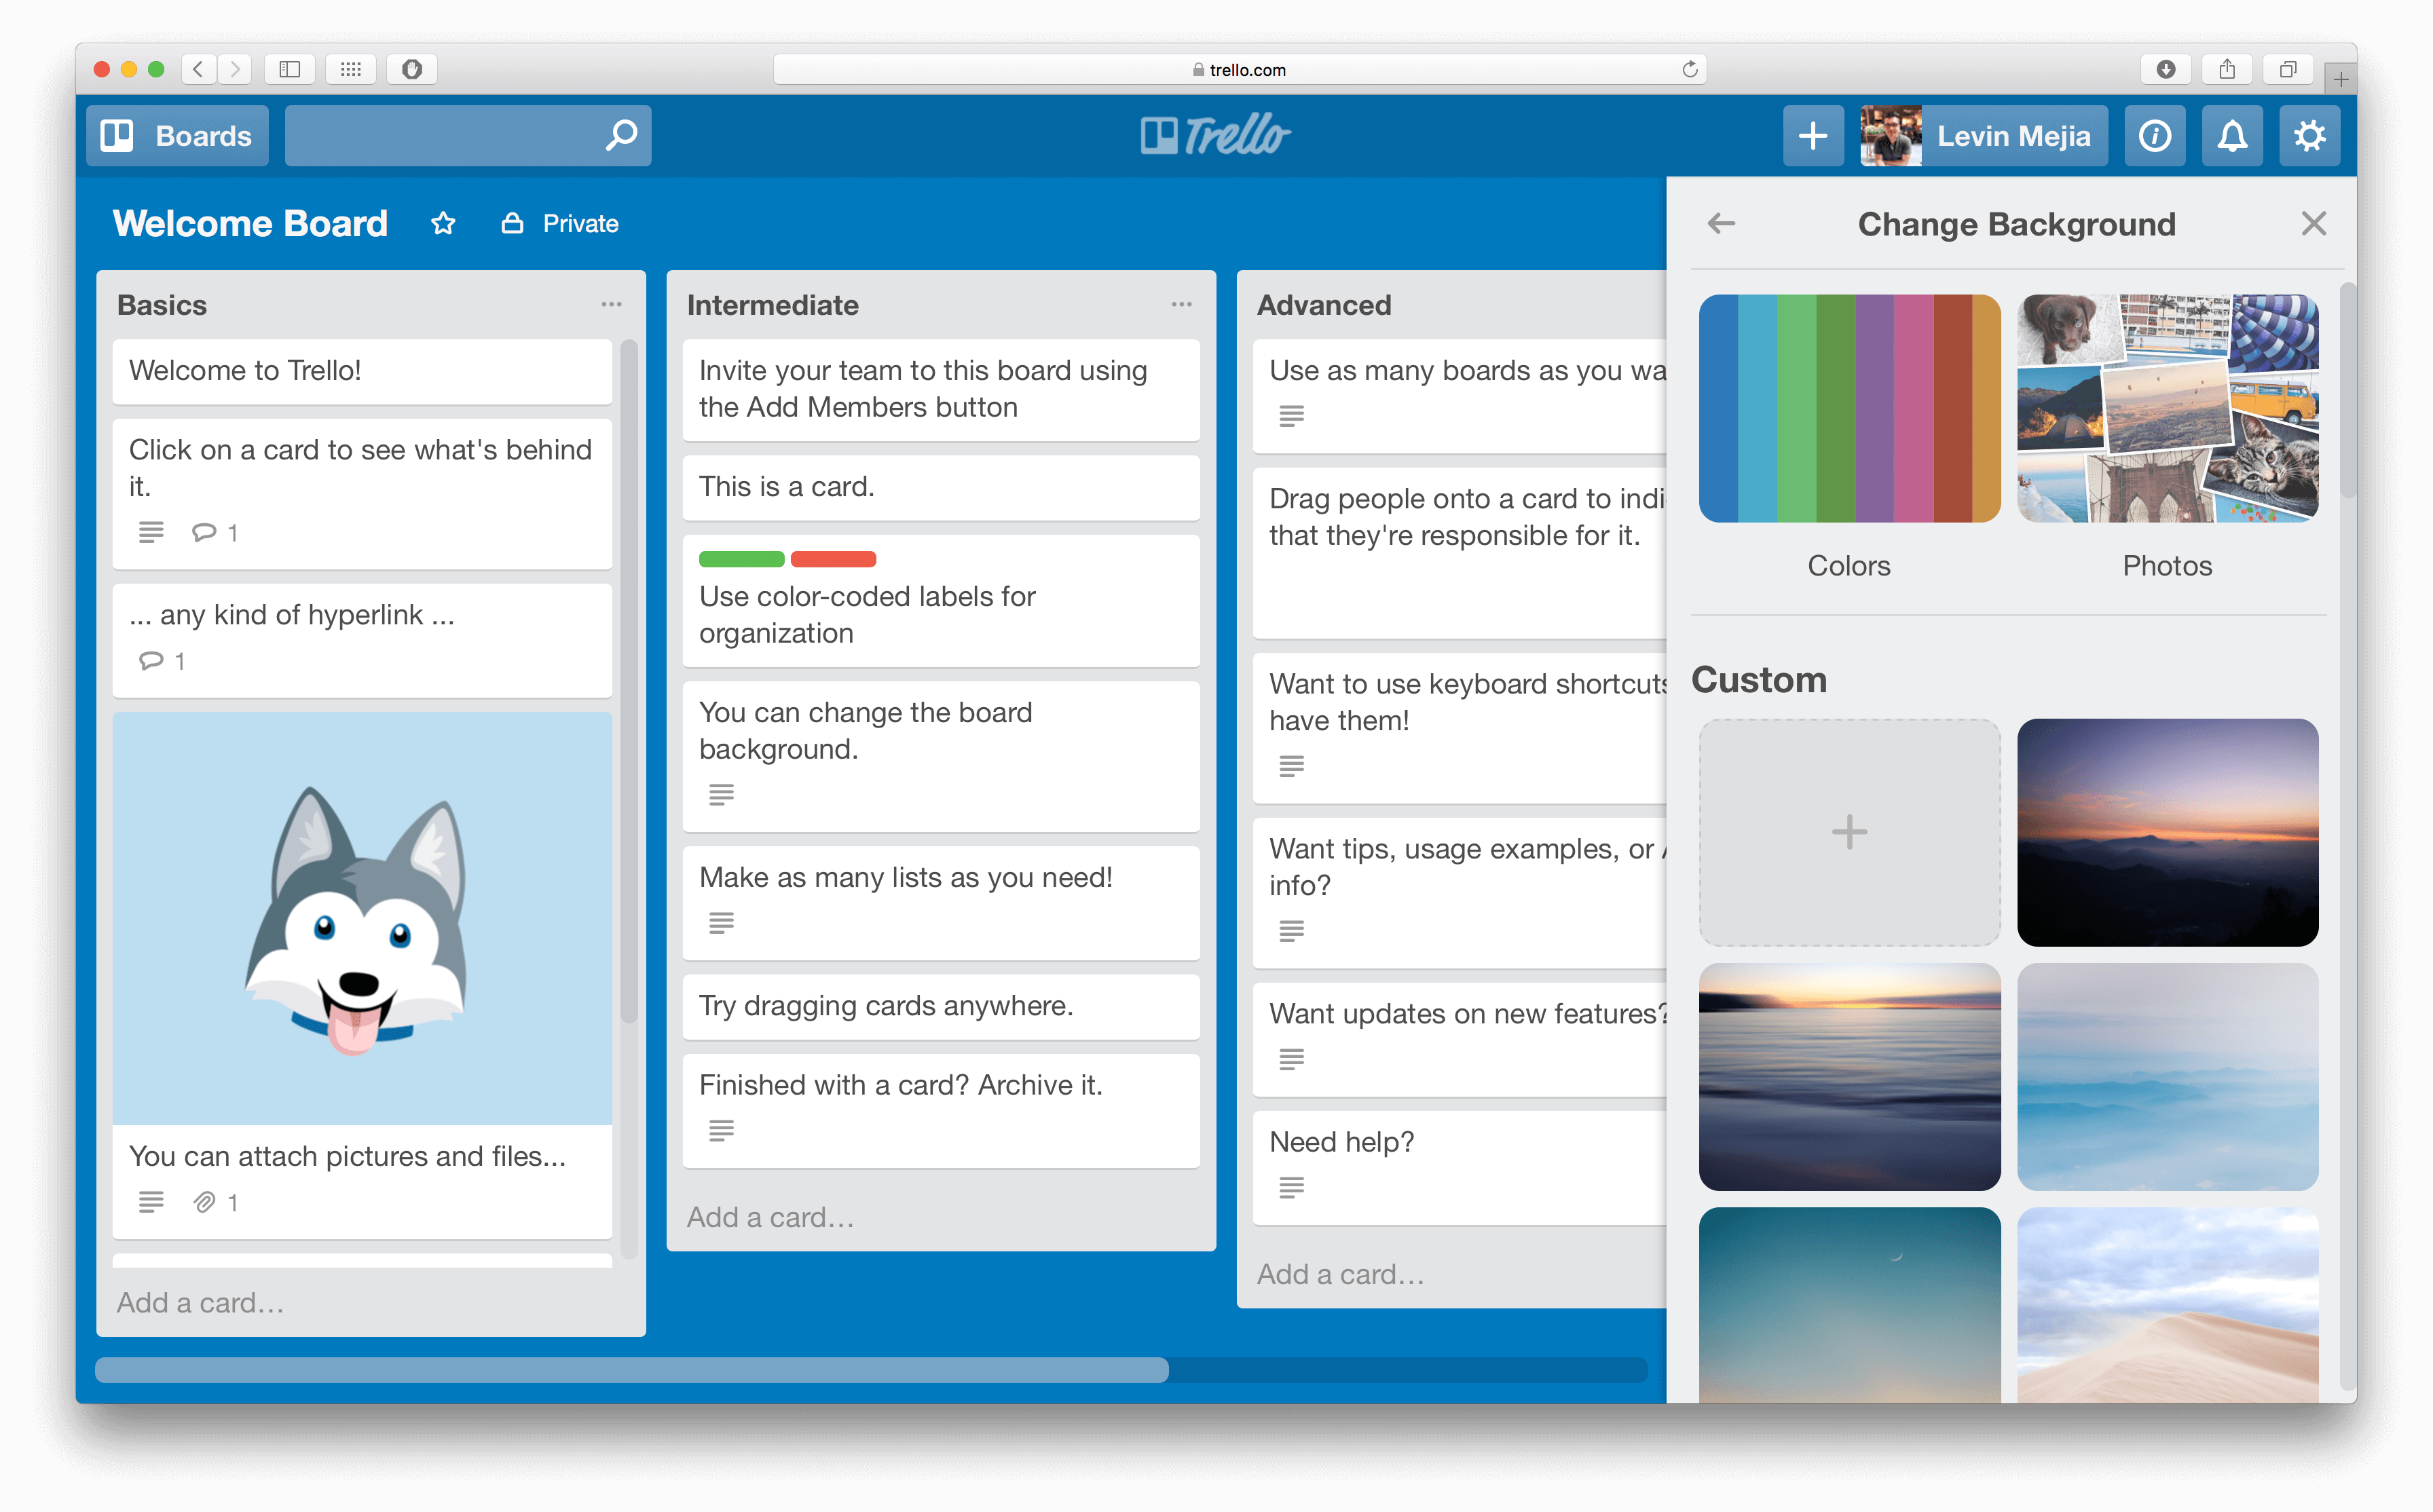 Change backgrounds in Trello